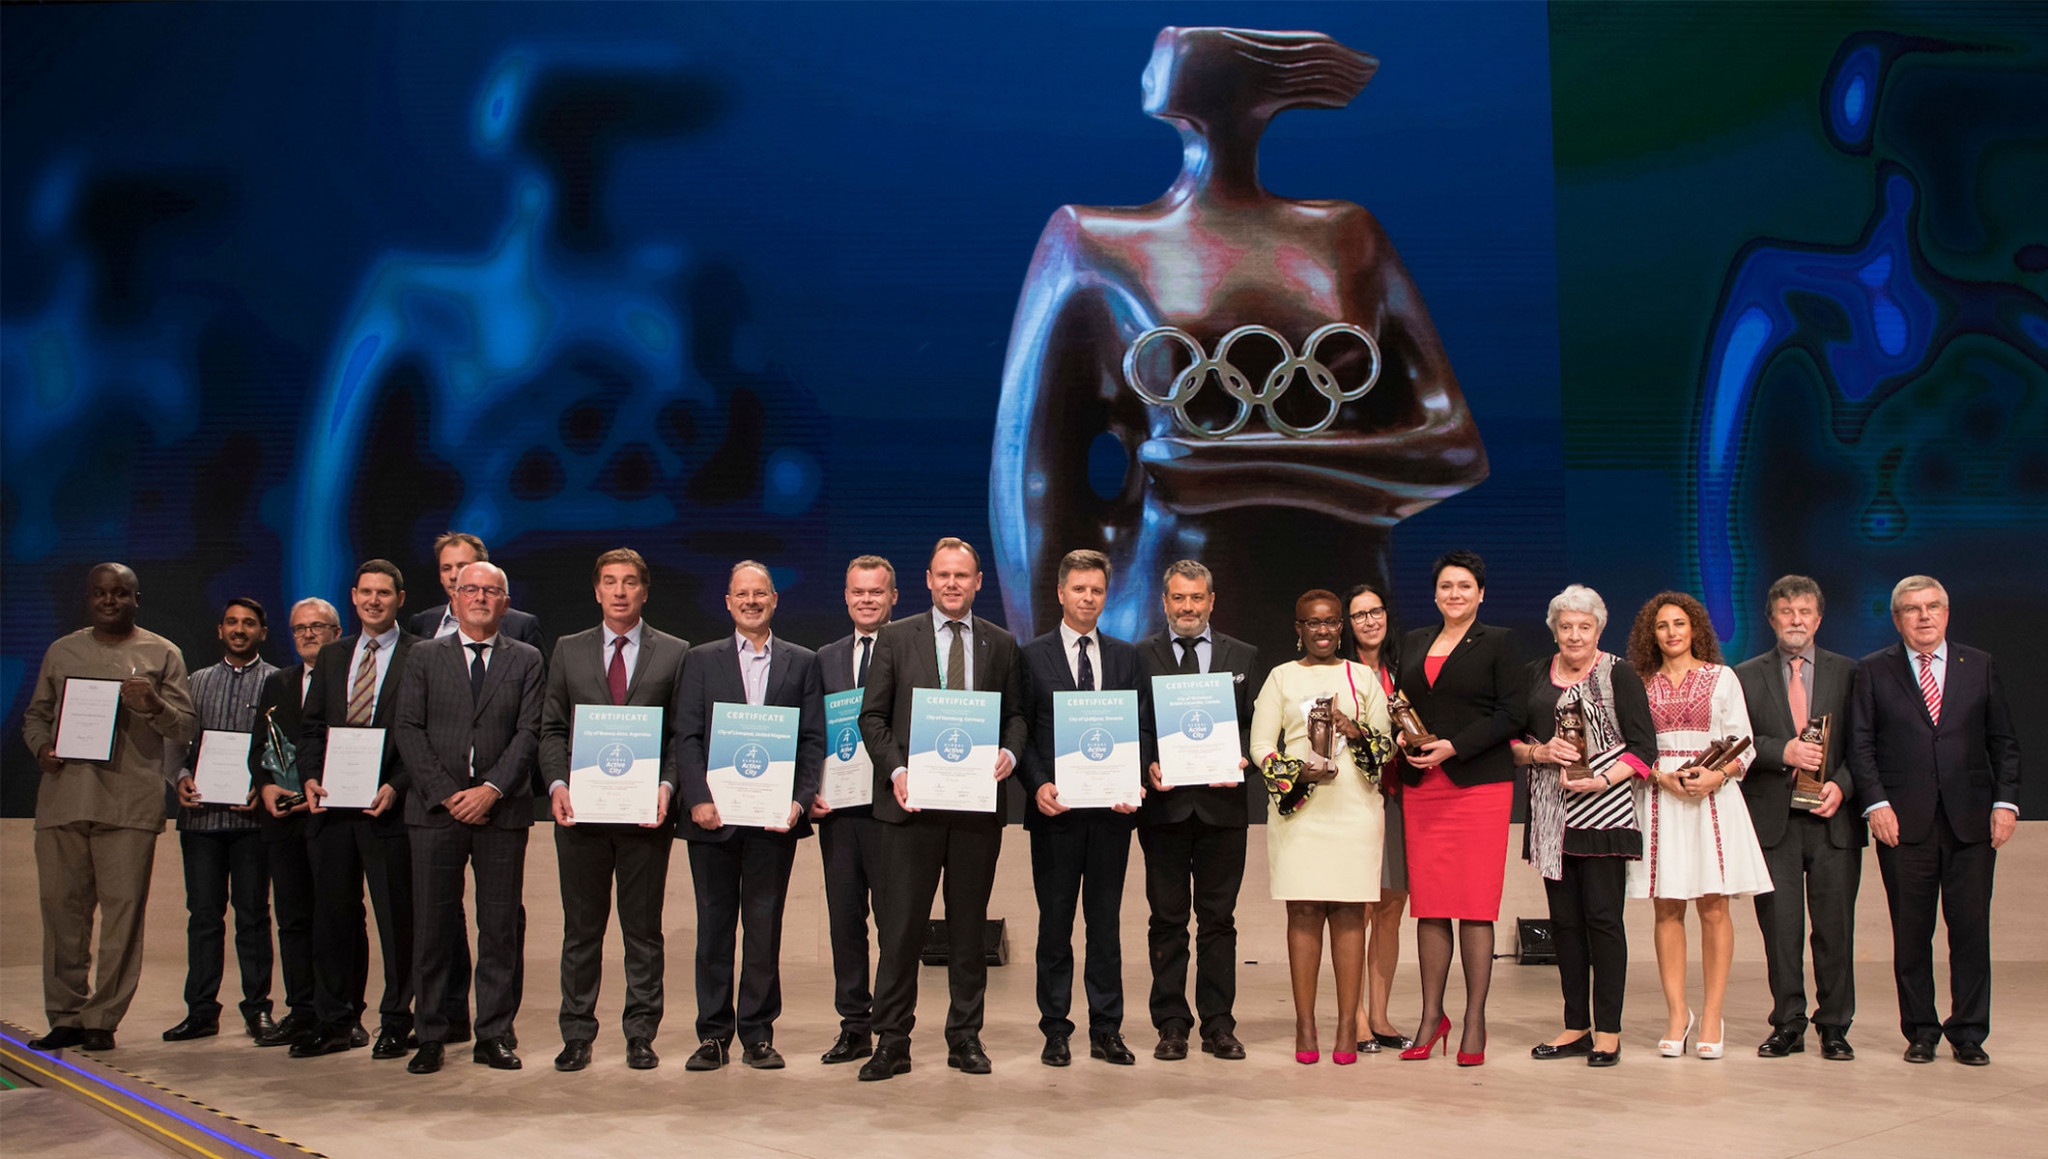 IOC Women in Sport and Lifetime Coaching achievements awards were handed out ©IOC